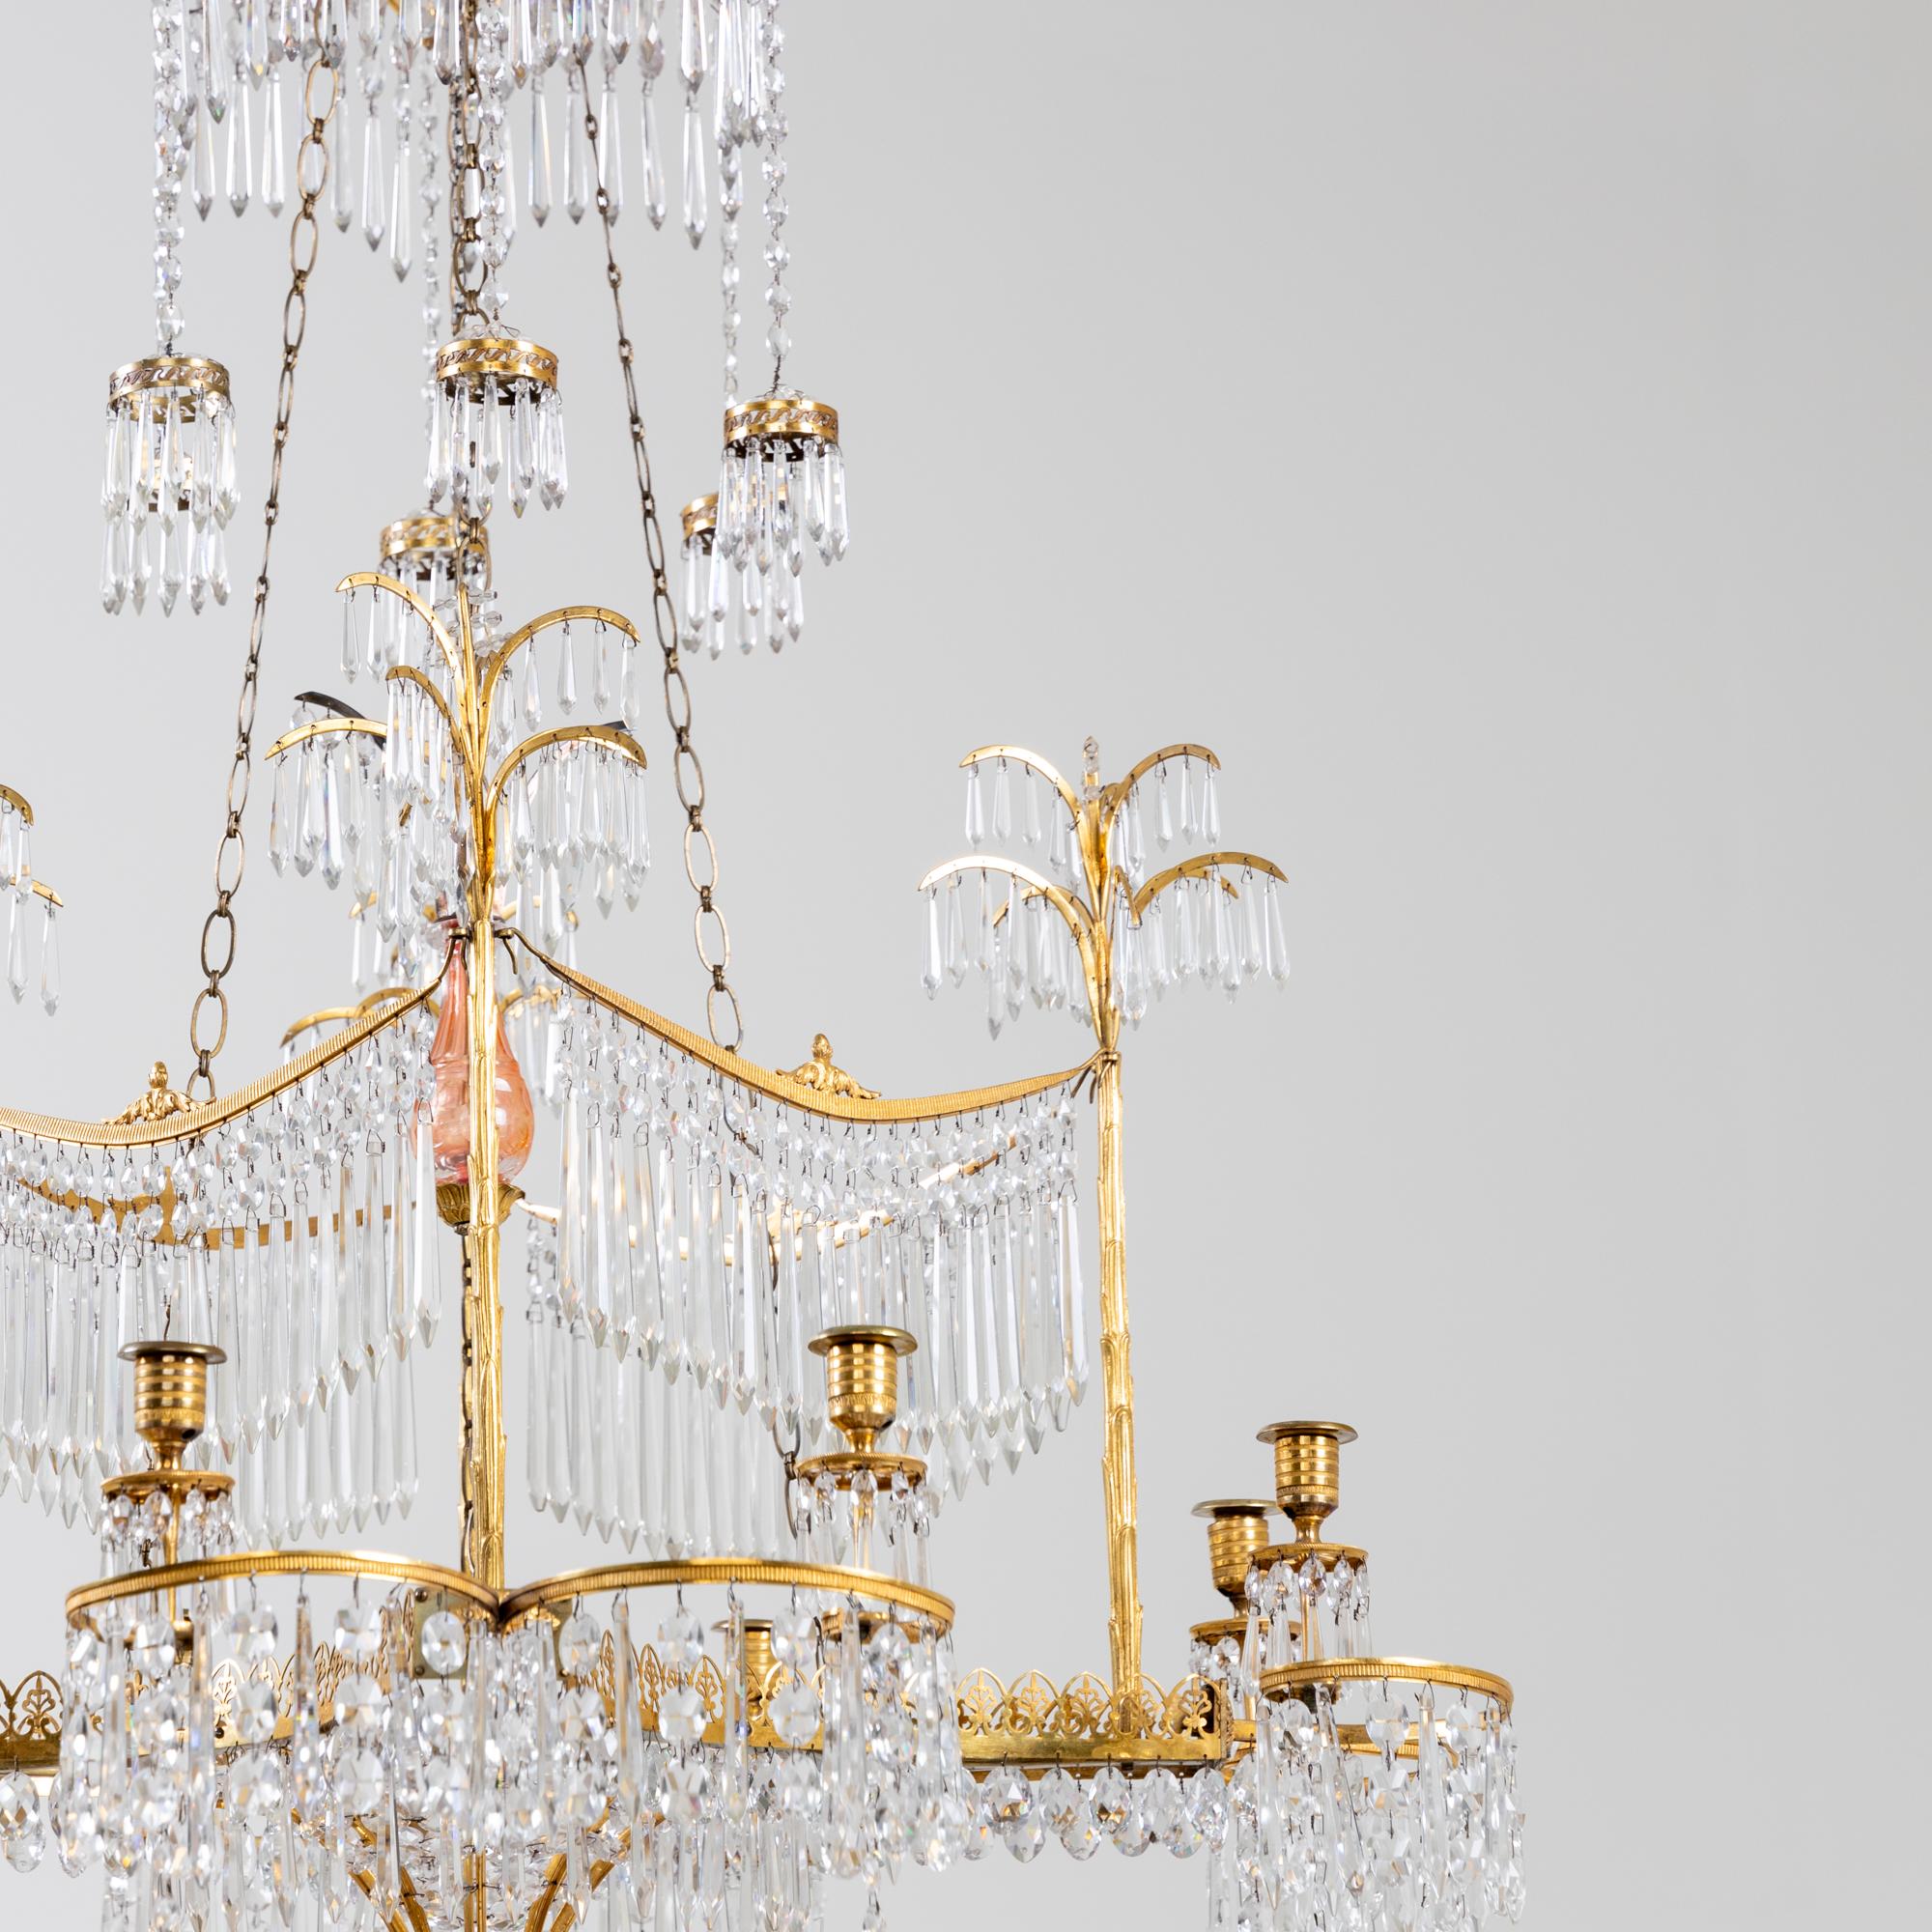 Bronze Chandelier with Palm Trees, Werner & Mieth, Berlin c. 1800-1810 For Sale